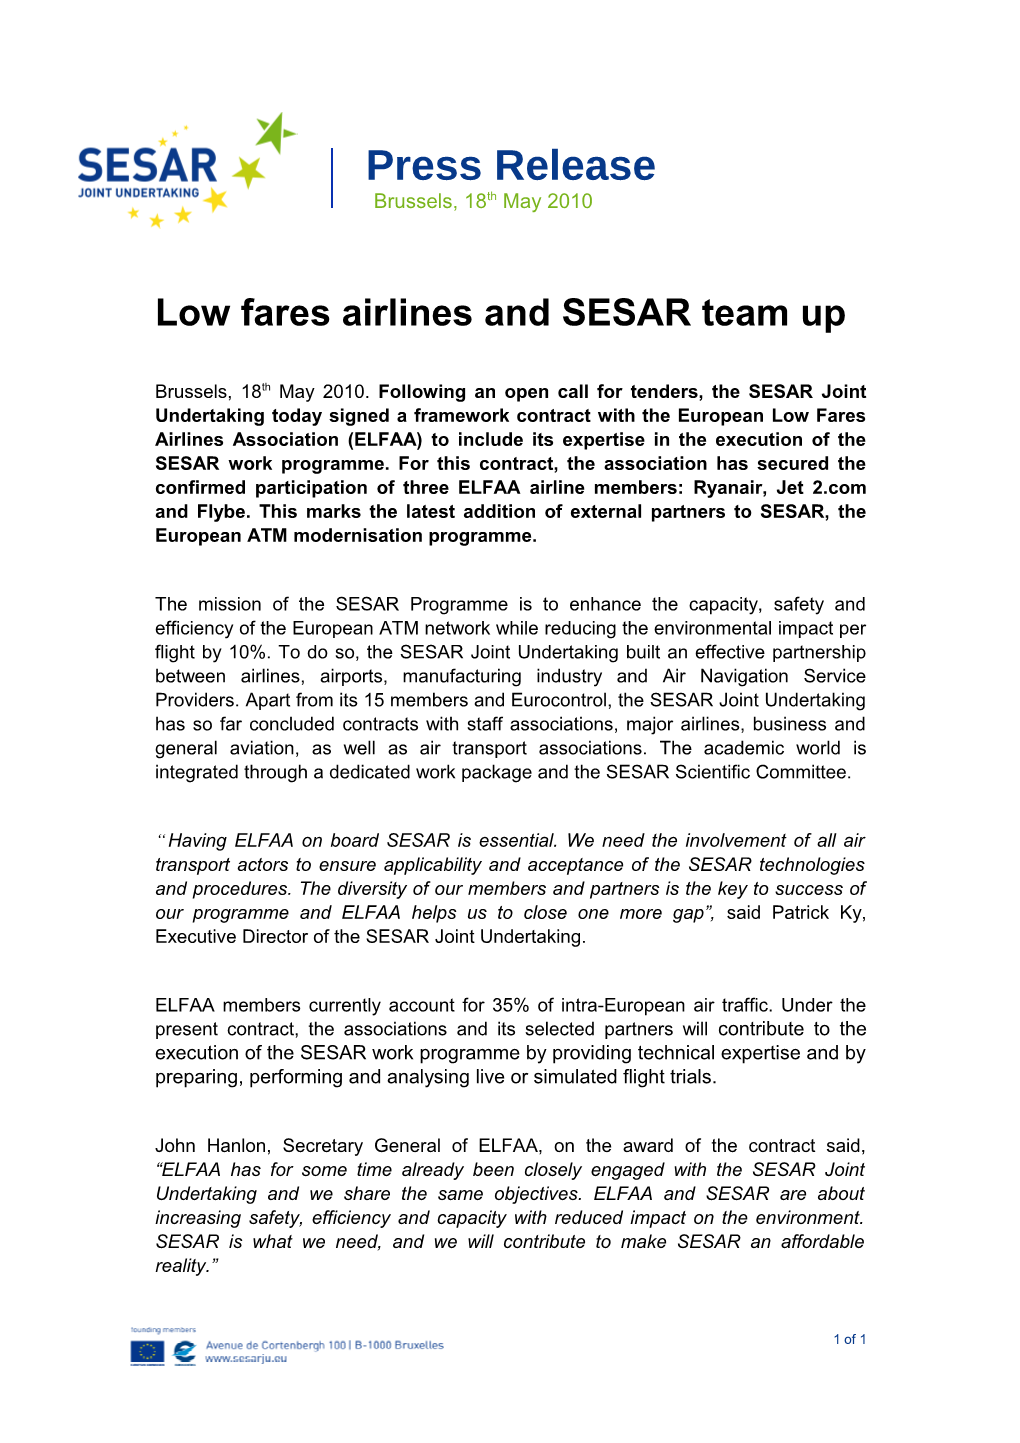 Low Fare Airlines and SESAR Team Up